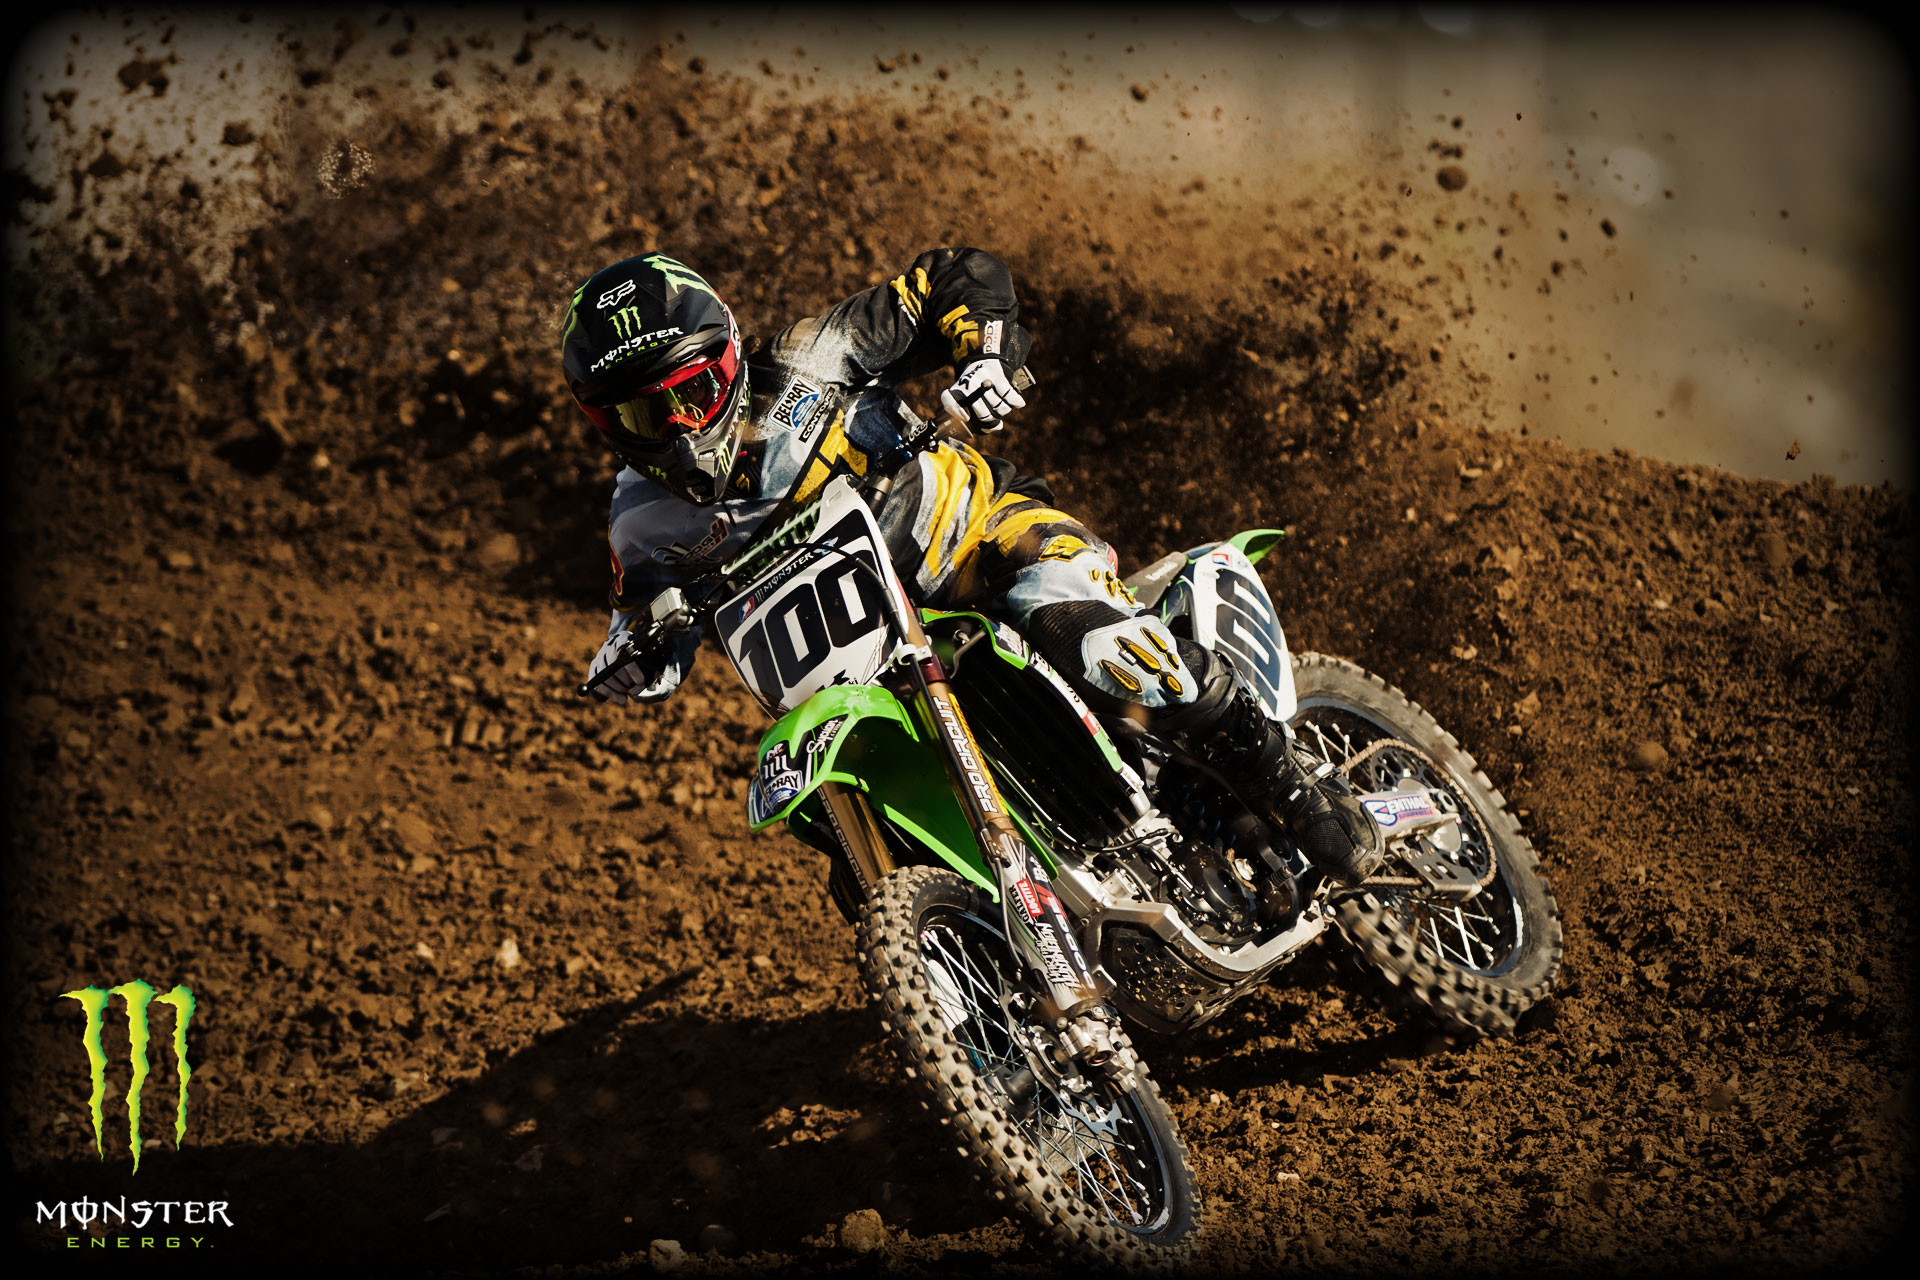 Motocross Bikes Wallpapers (63+ pictures)